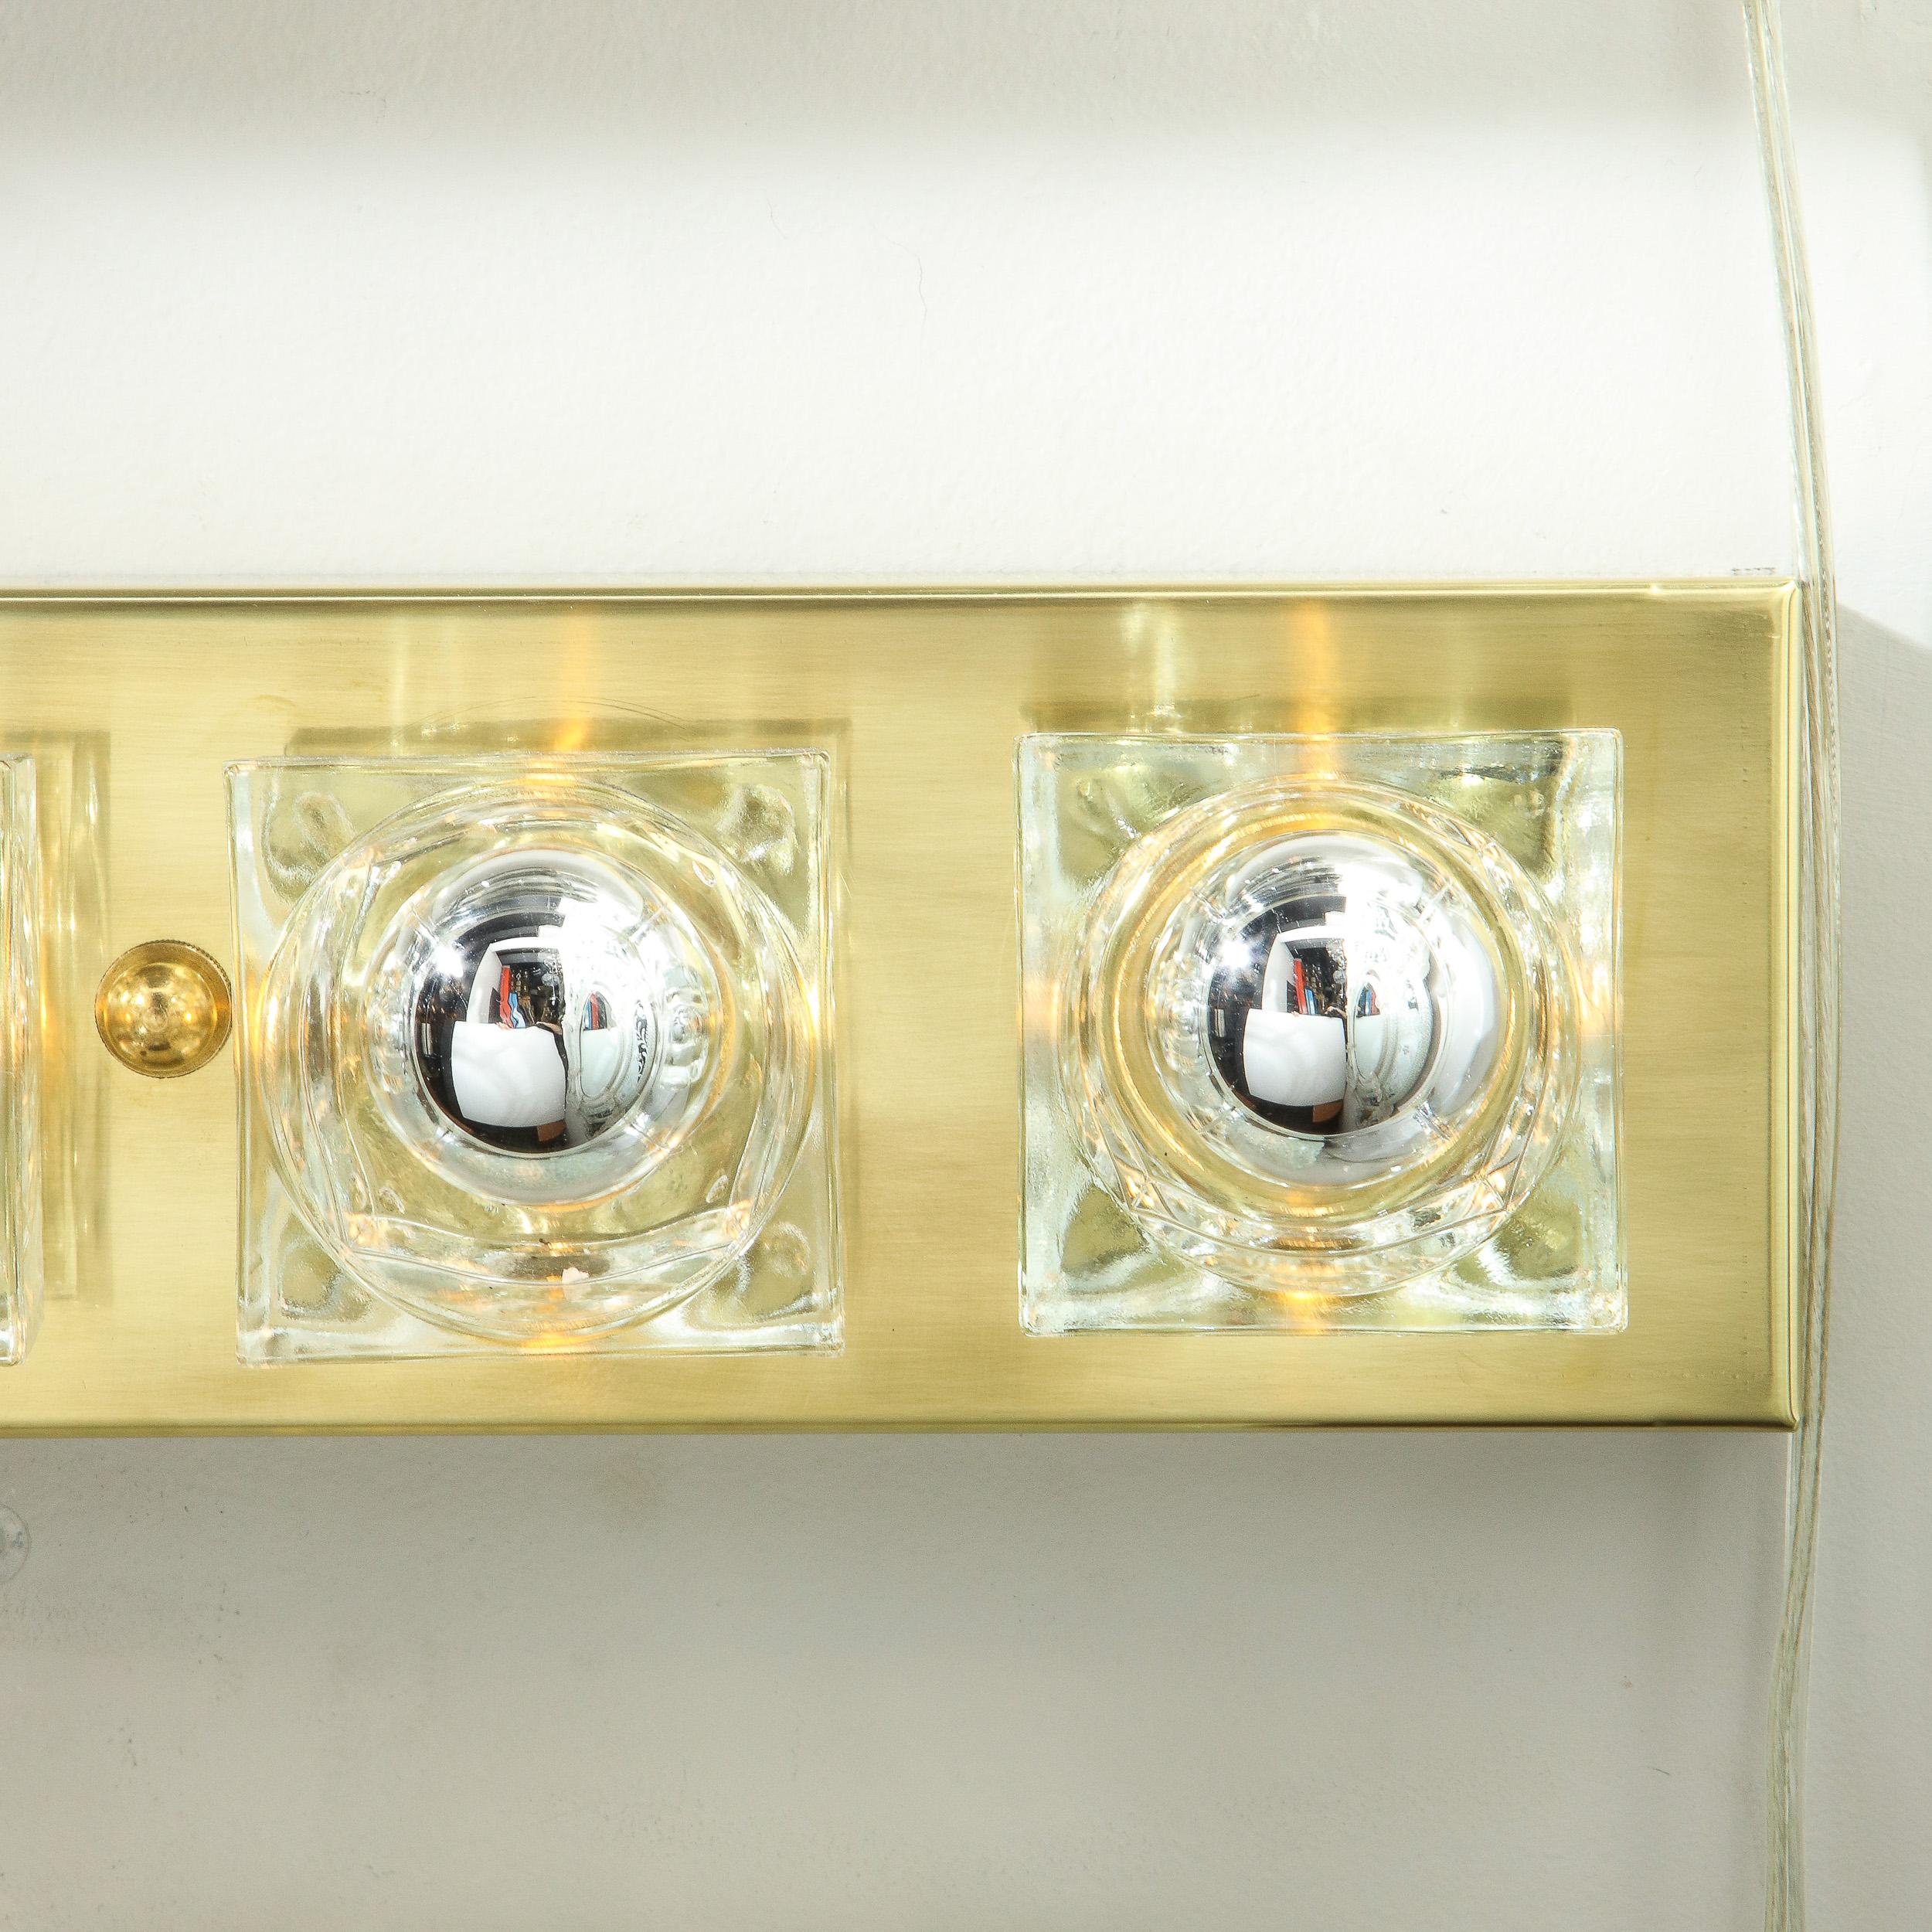 Italian Mid-Century Modern Brushed Brass and Translucent Cub Glass Vanity by Sciolari For Sale